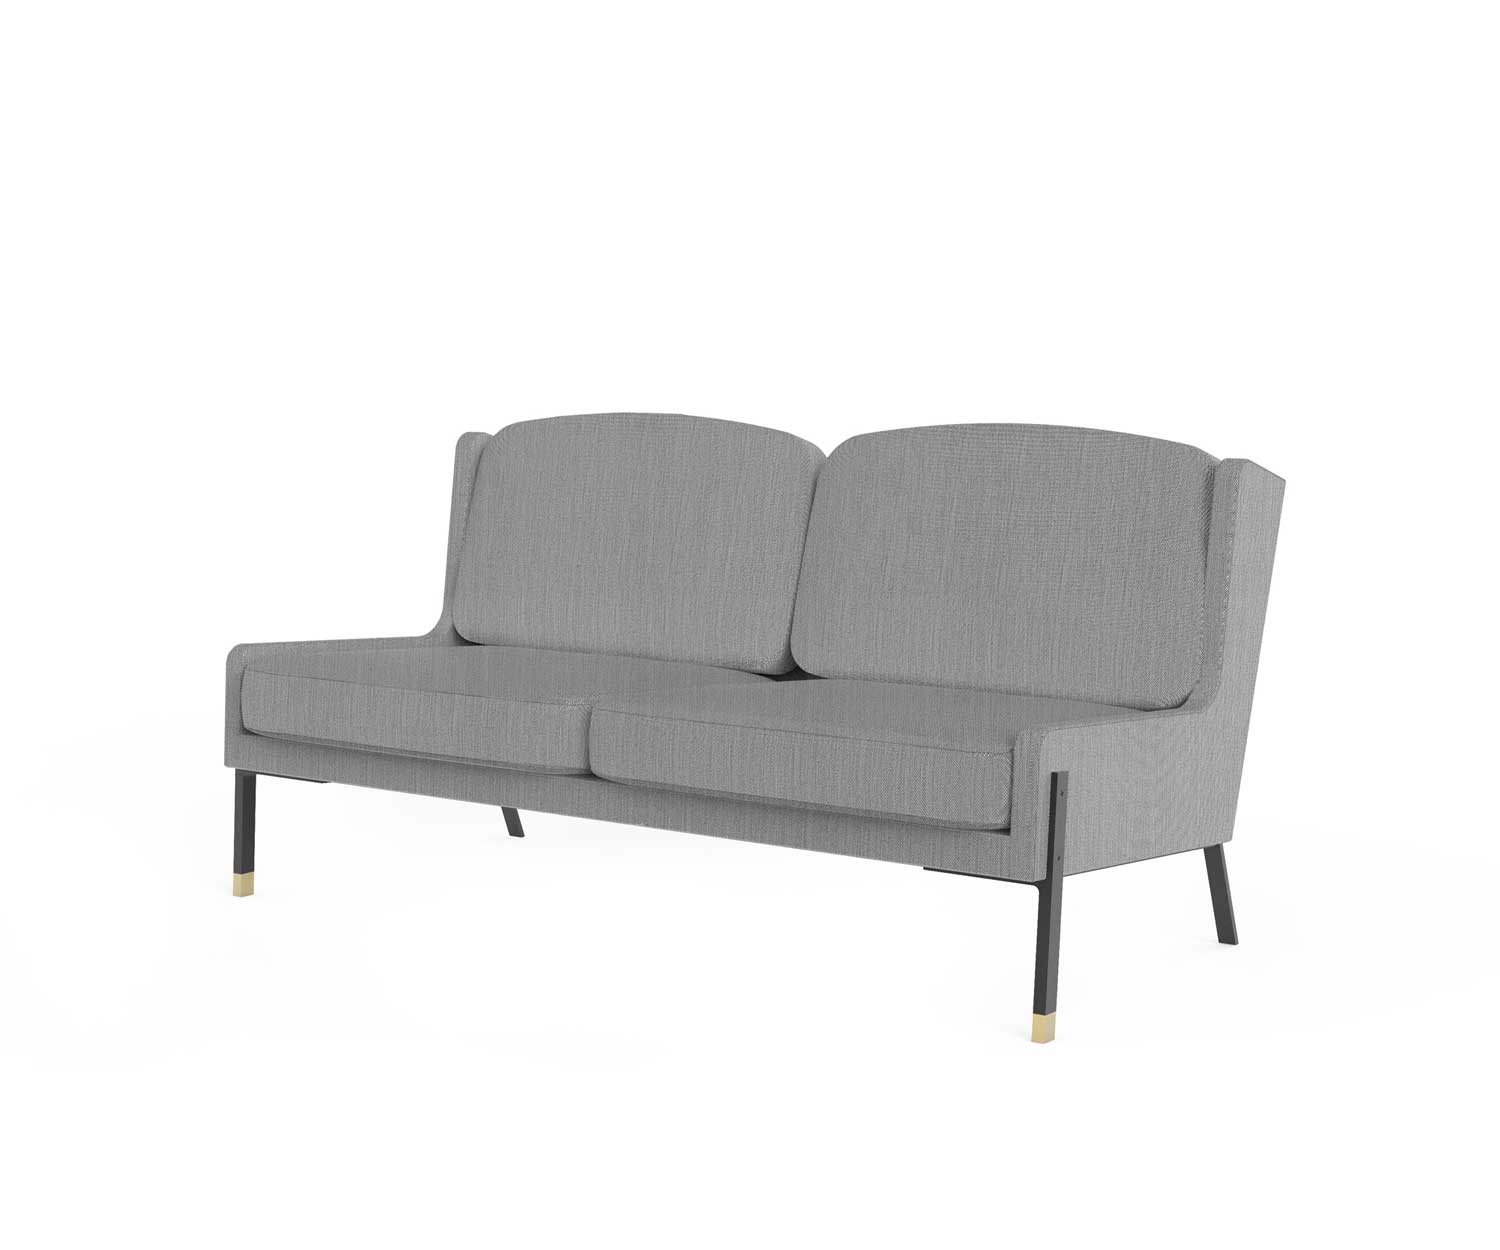 Blink Sofa Two Seater